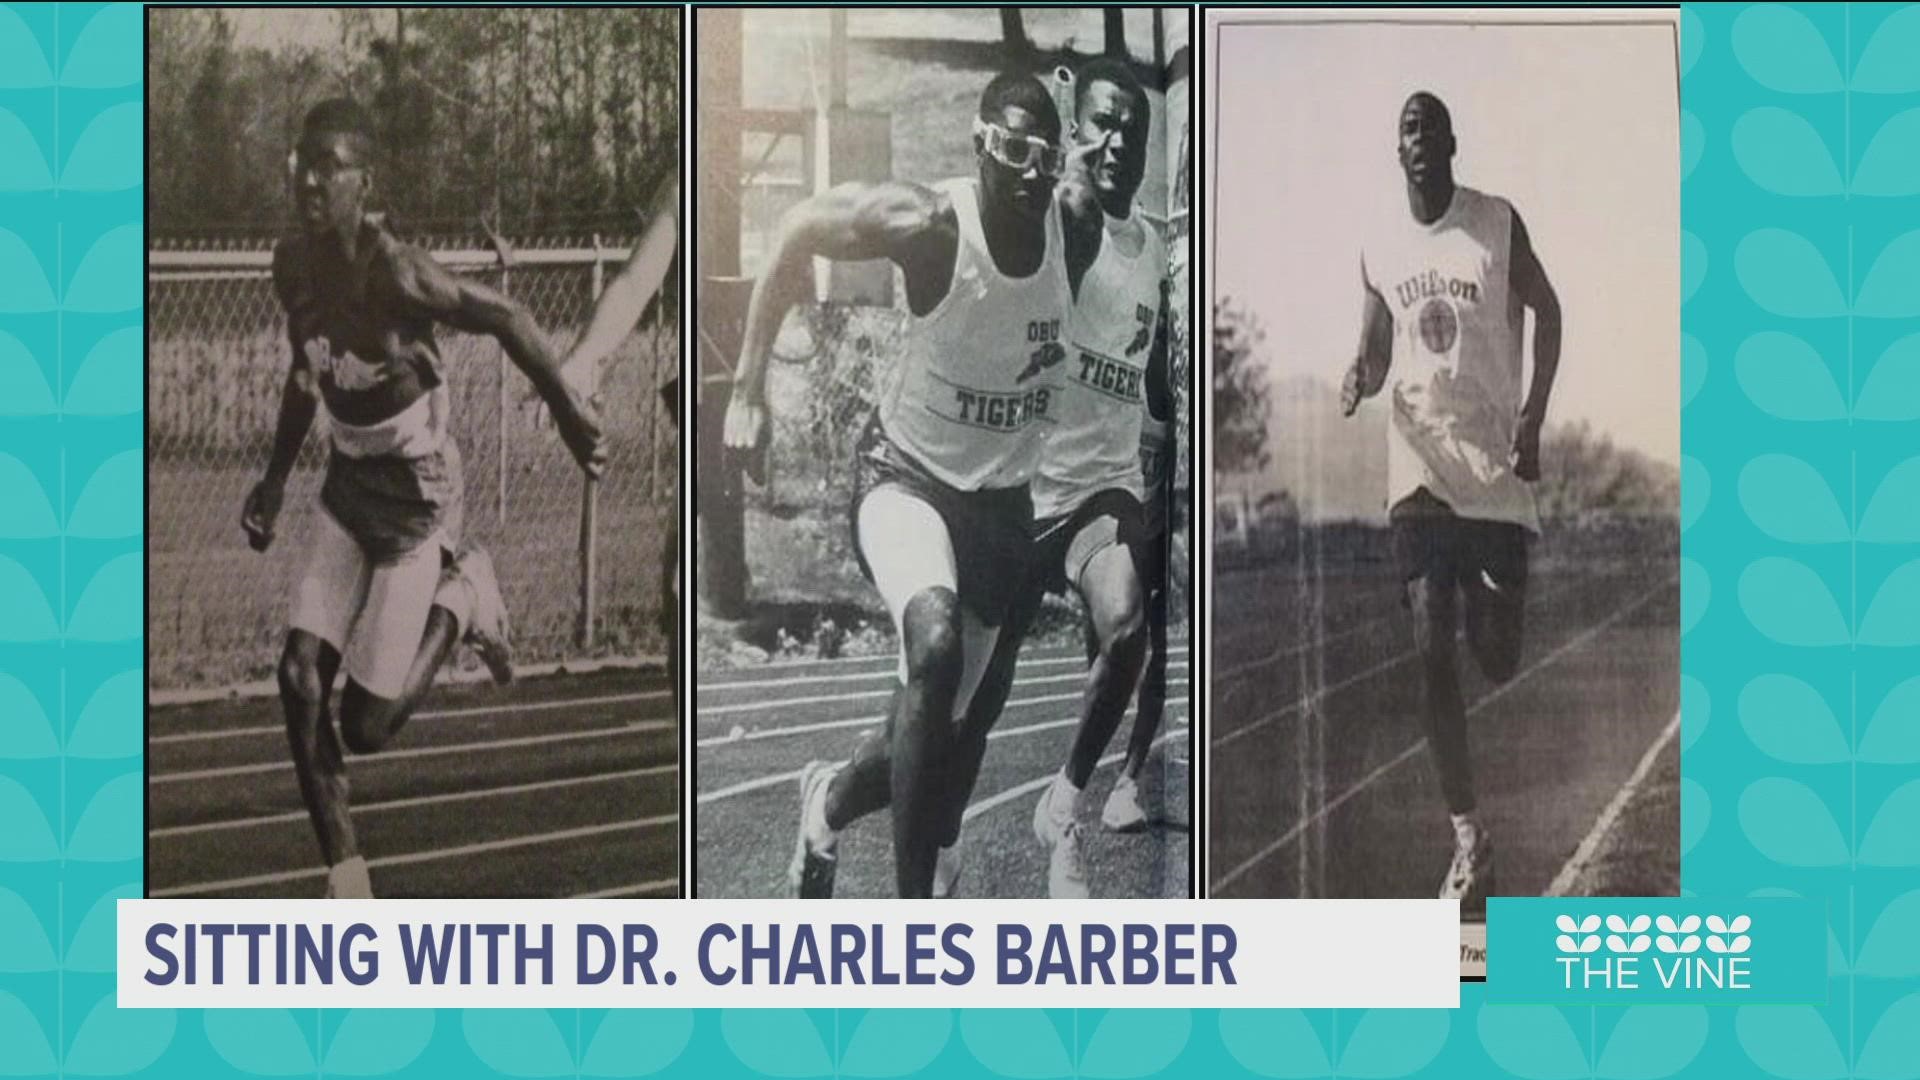 Dr. Charles Barber is set to join the elite names in the Arkansas Sports Hall of Fame in June for his track career at Bald Knob High School and Ouachita Baptist.